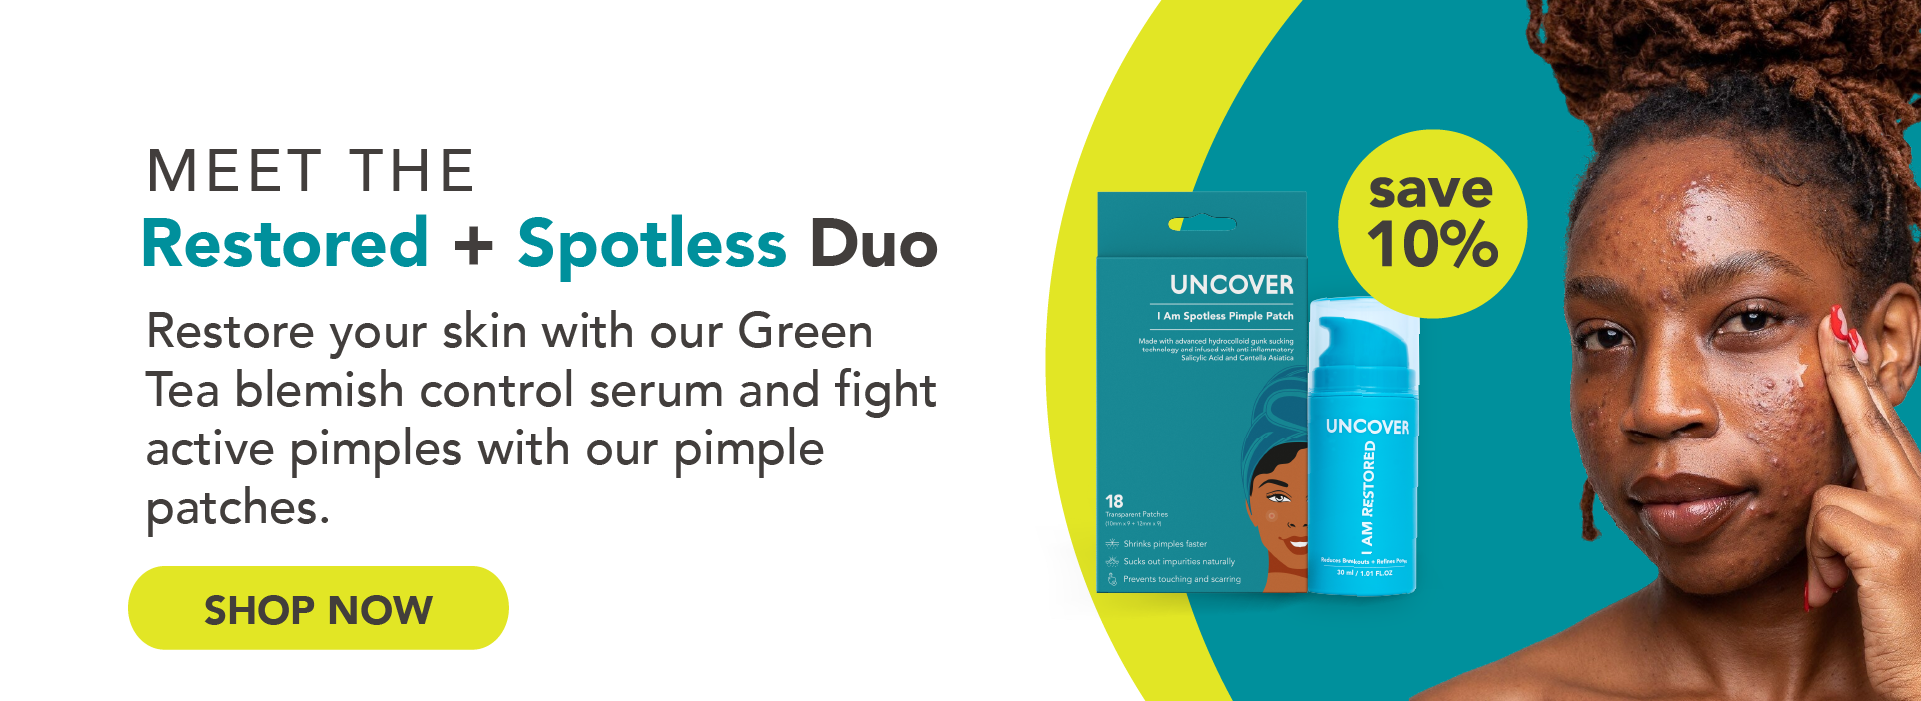 Restore and Spotless Duo